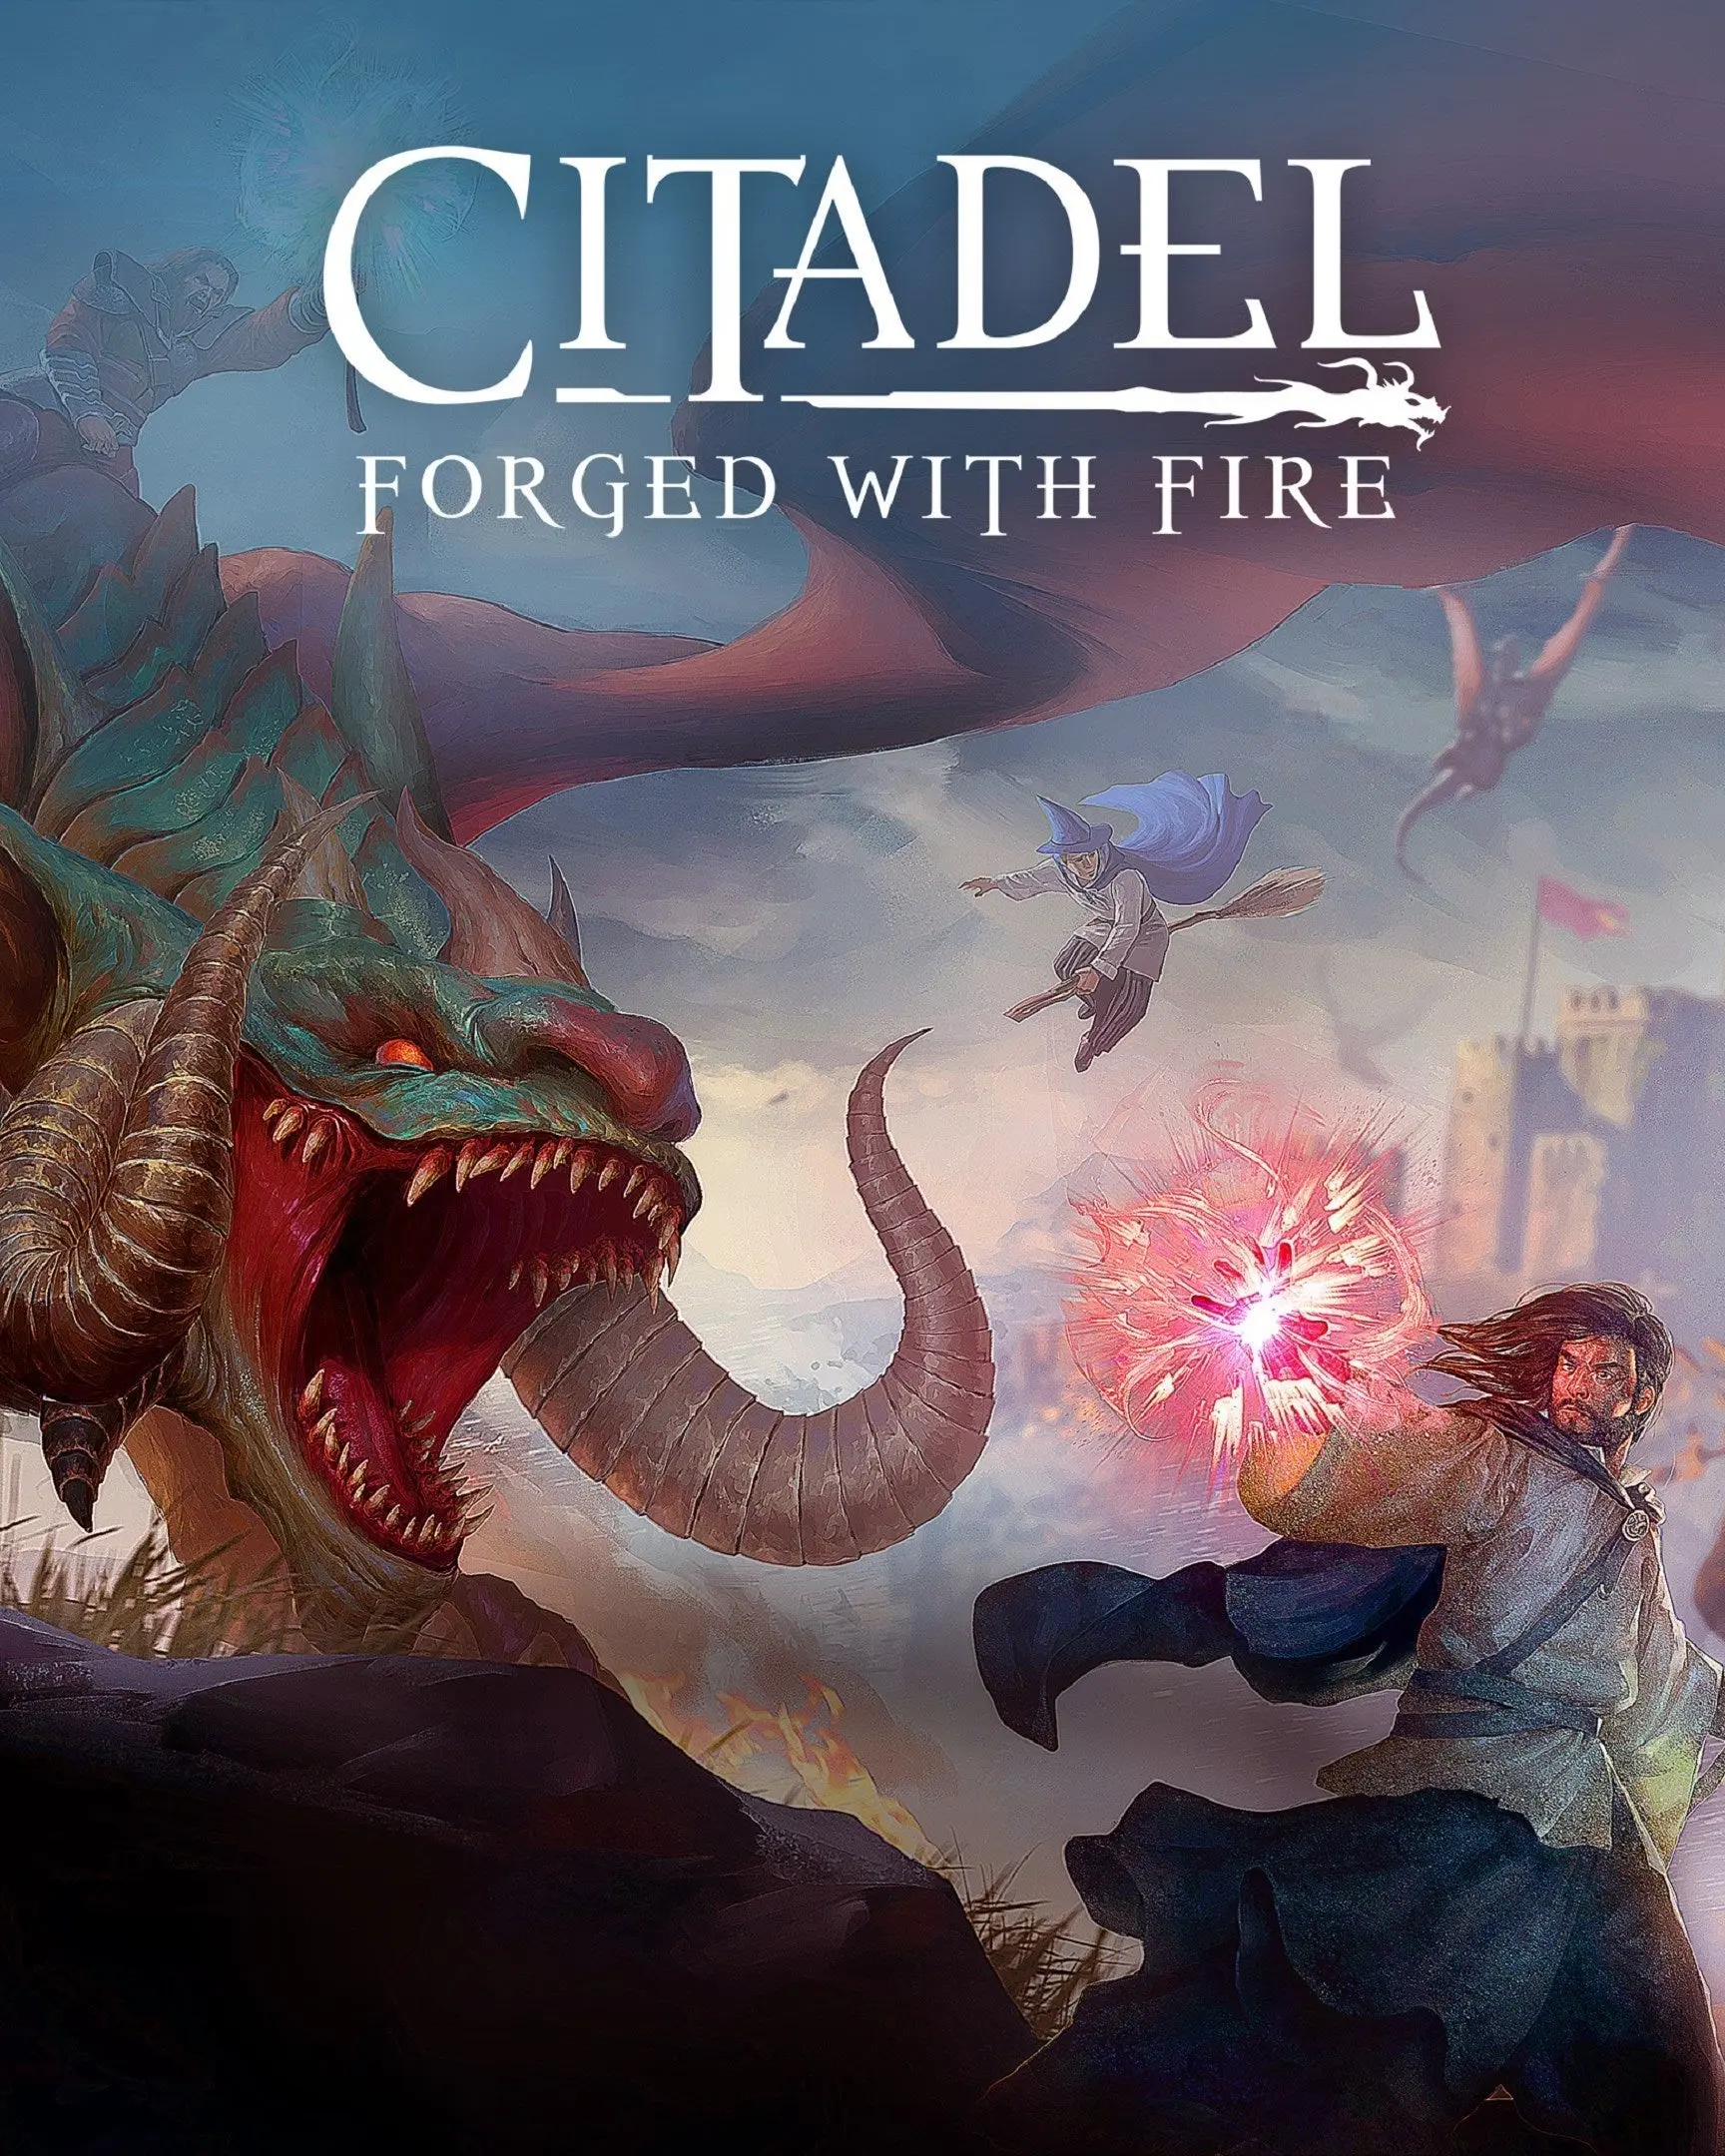 Citadel: Forged with Fire (AR) (Xbox One / Xbox Series X|S) - Xbox Live - Digital Code